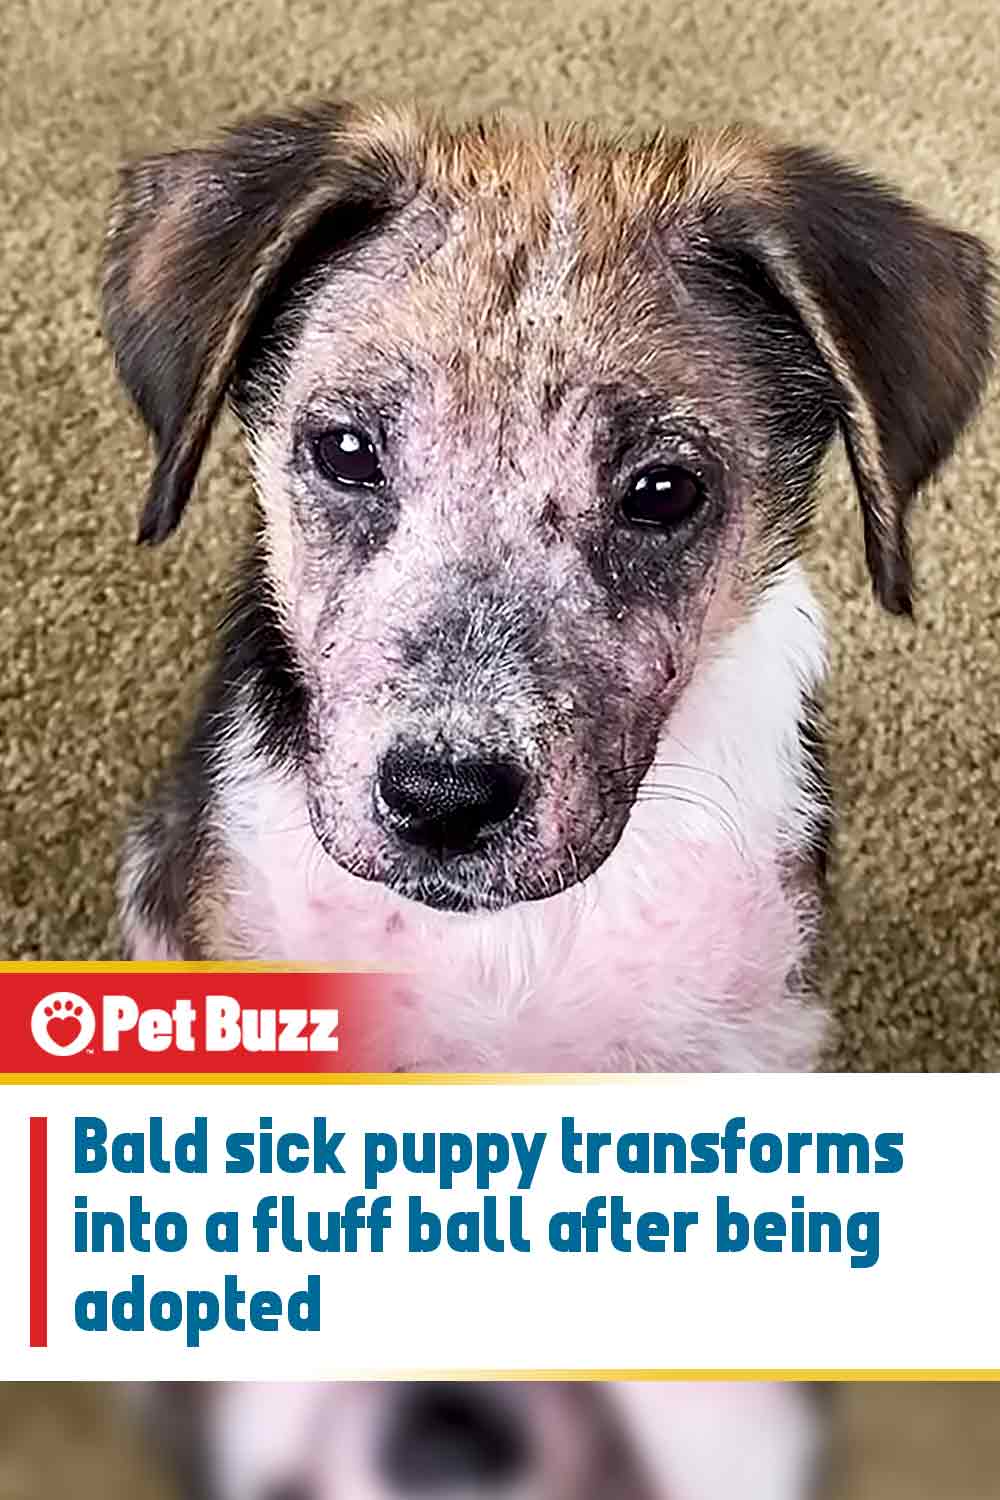 Bald sick puppy transforms into a fluff ball after being adopted